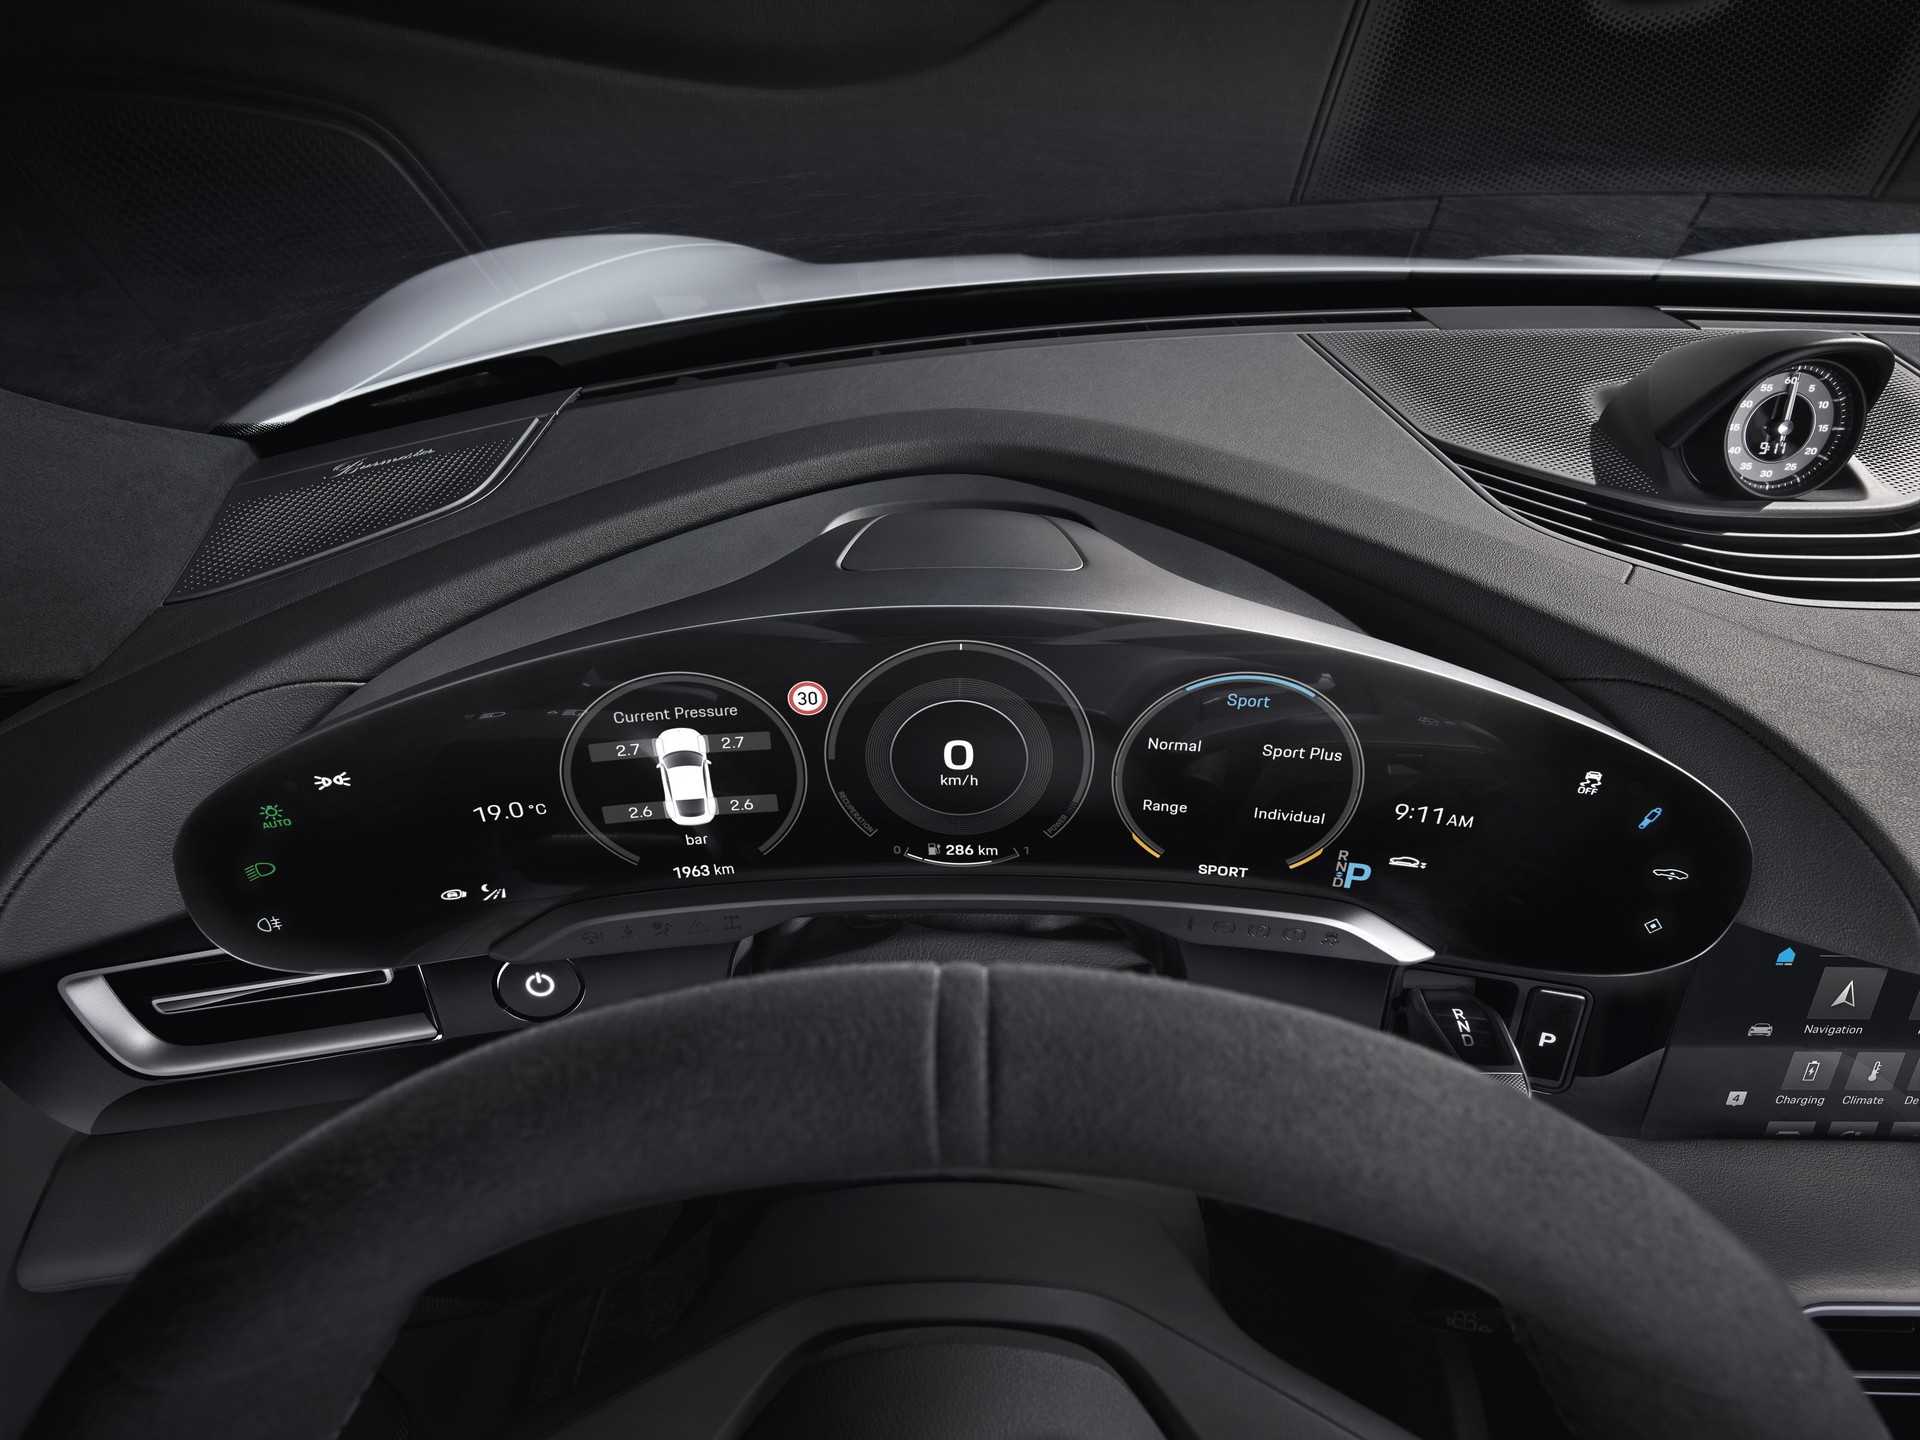 2020 Porsche Taycan Interior Fully Revealed Even The